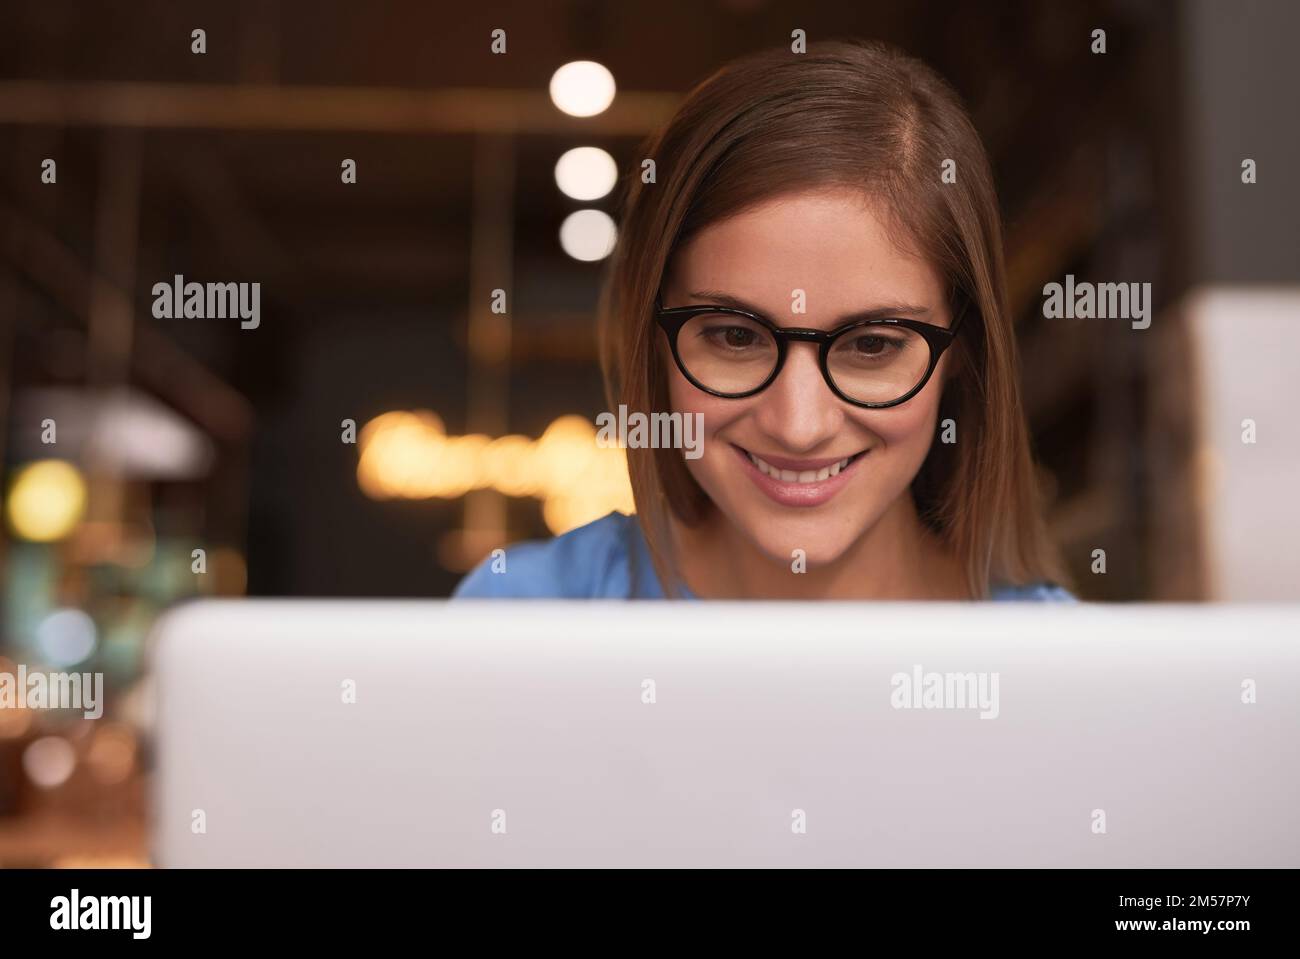 Working on her blog. an attractive young woman blogging in her local coffee shop. Stock Photo